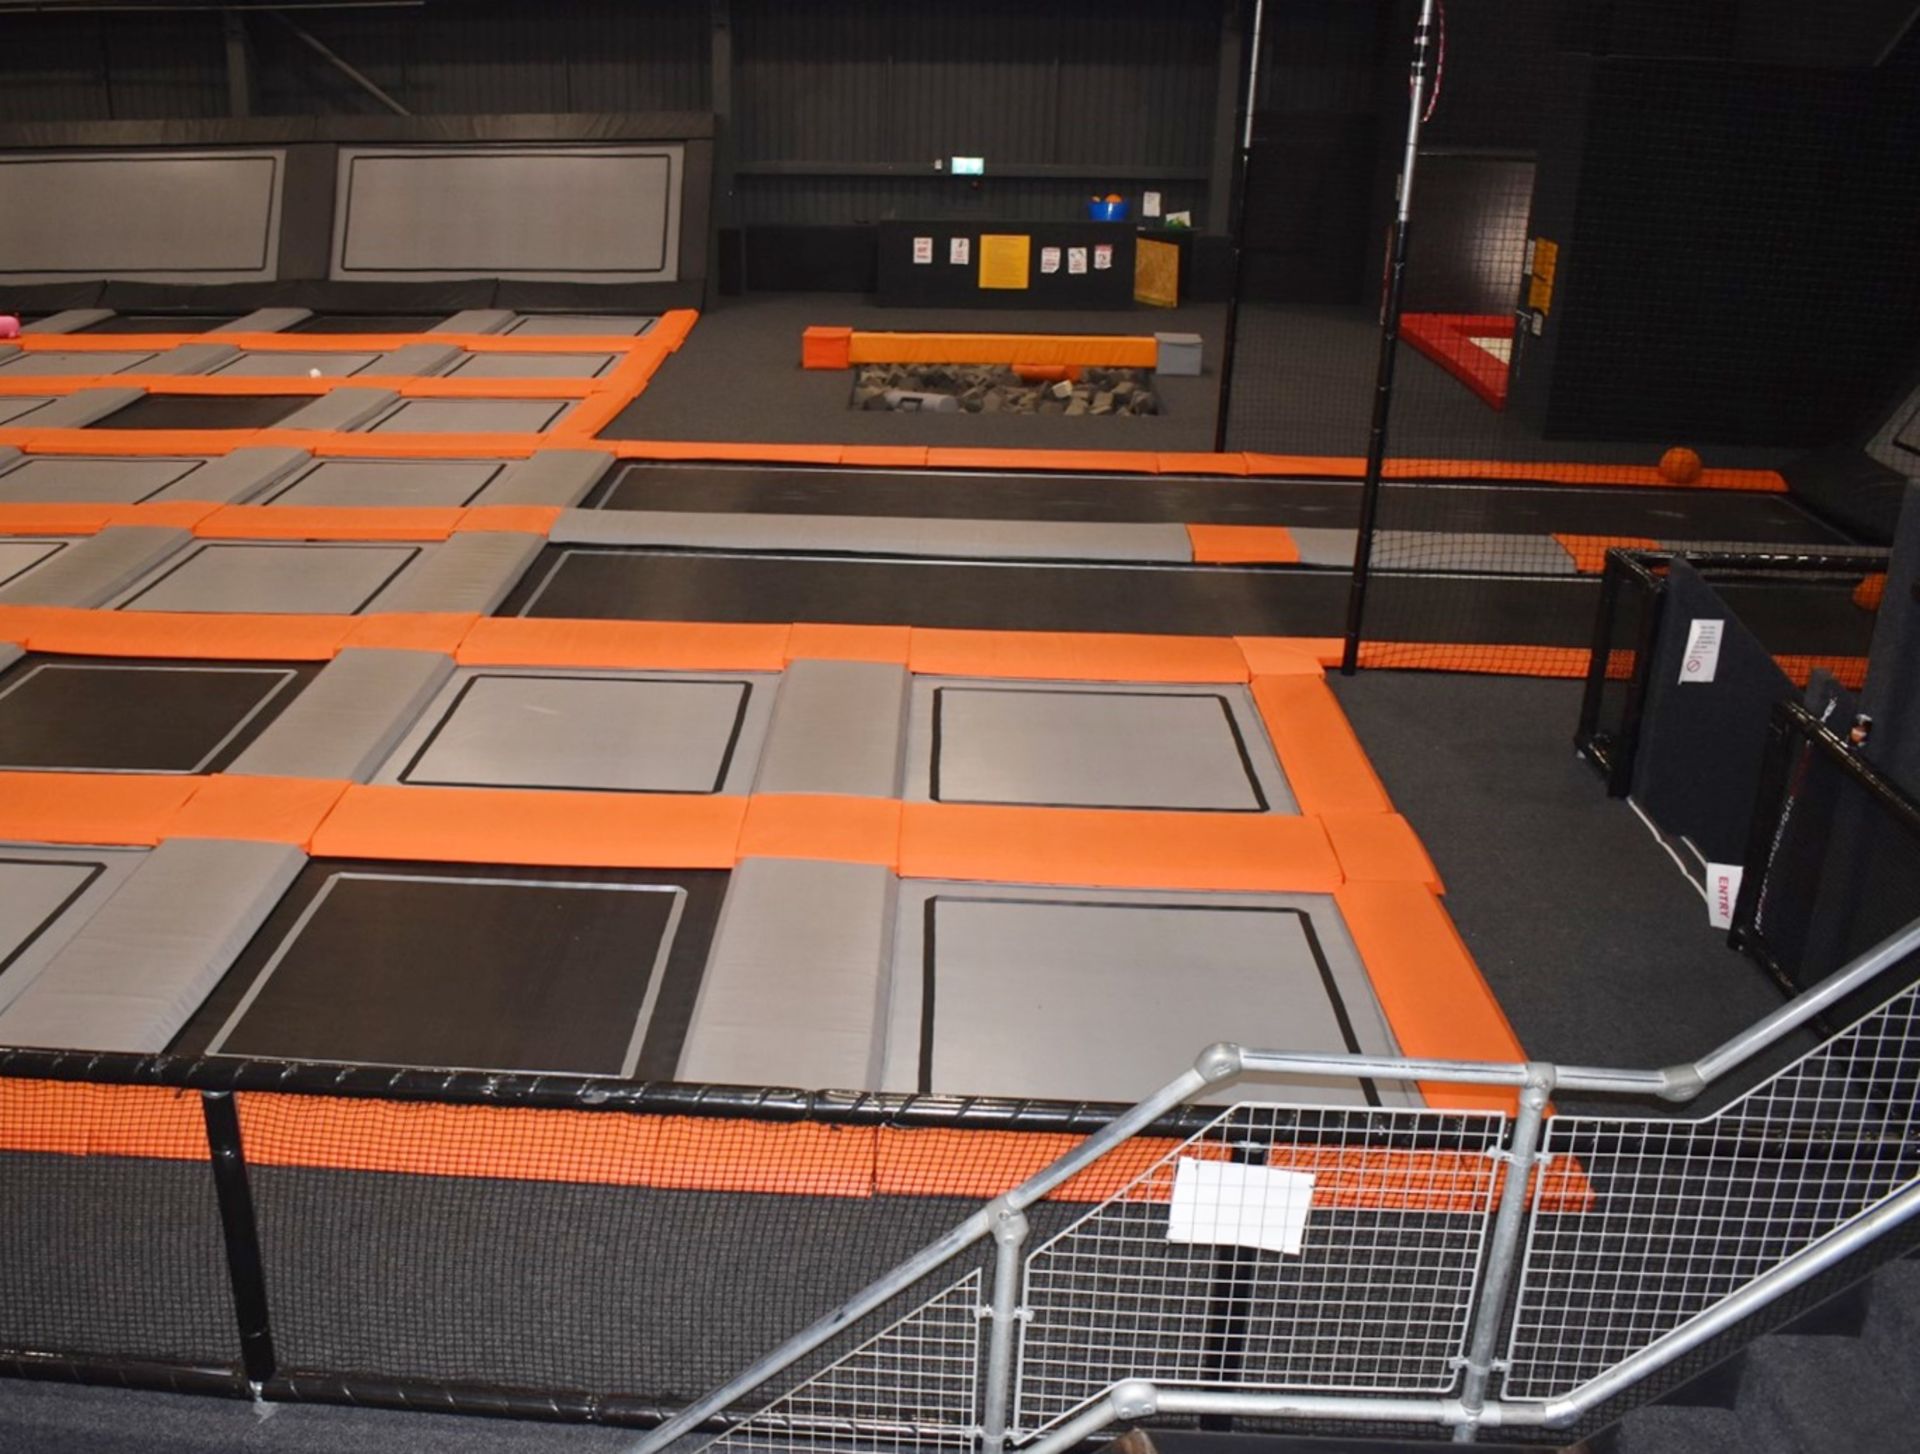 1 x Large Trampoline Park - Disassembled - Includes Dodgeball Arena And Jump Tower - CL766  - - Image 41 of 99